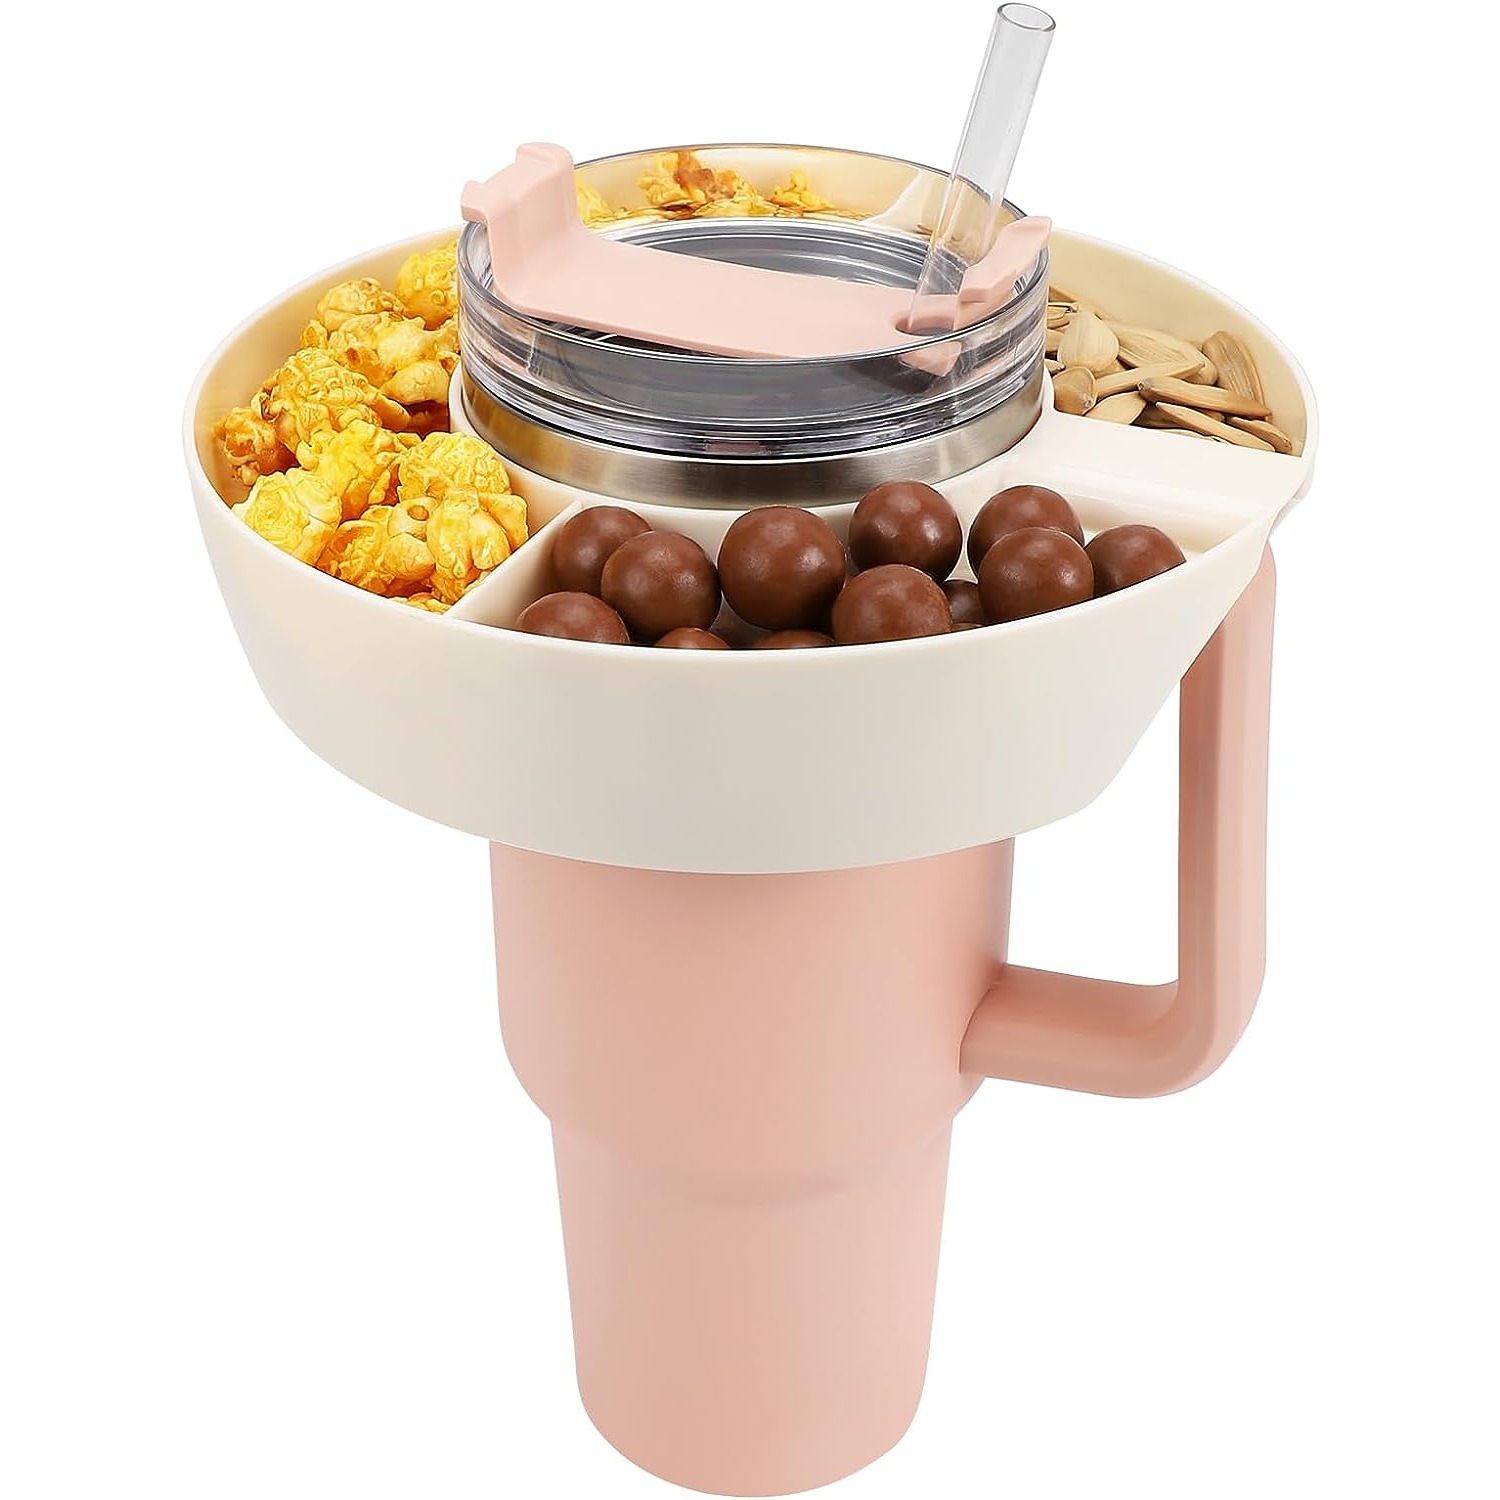 Cereal To Go Cup 29oz Portable Travel Cereal Bowl And Milk Container With  Spoon Durable Breakfast Cup Reusable Oatmeal Container